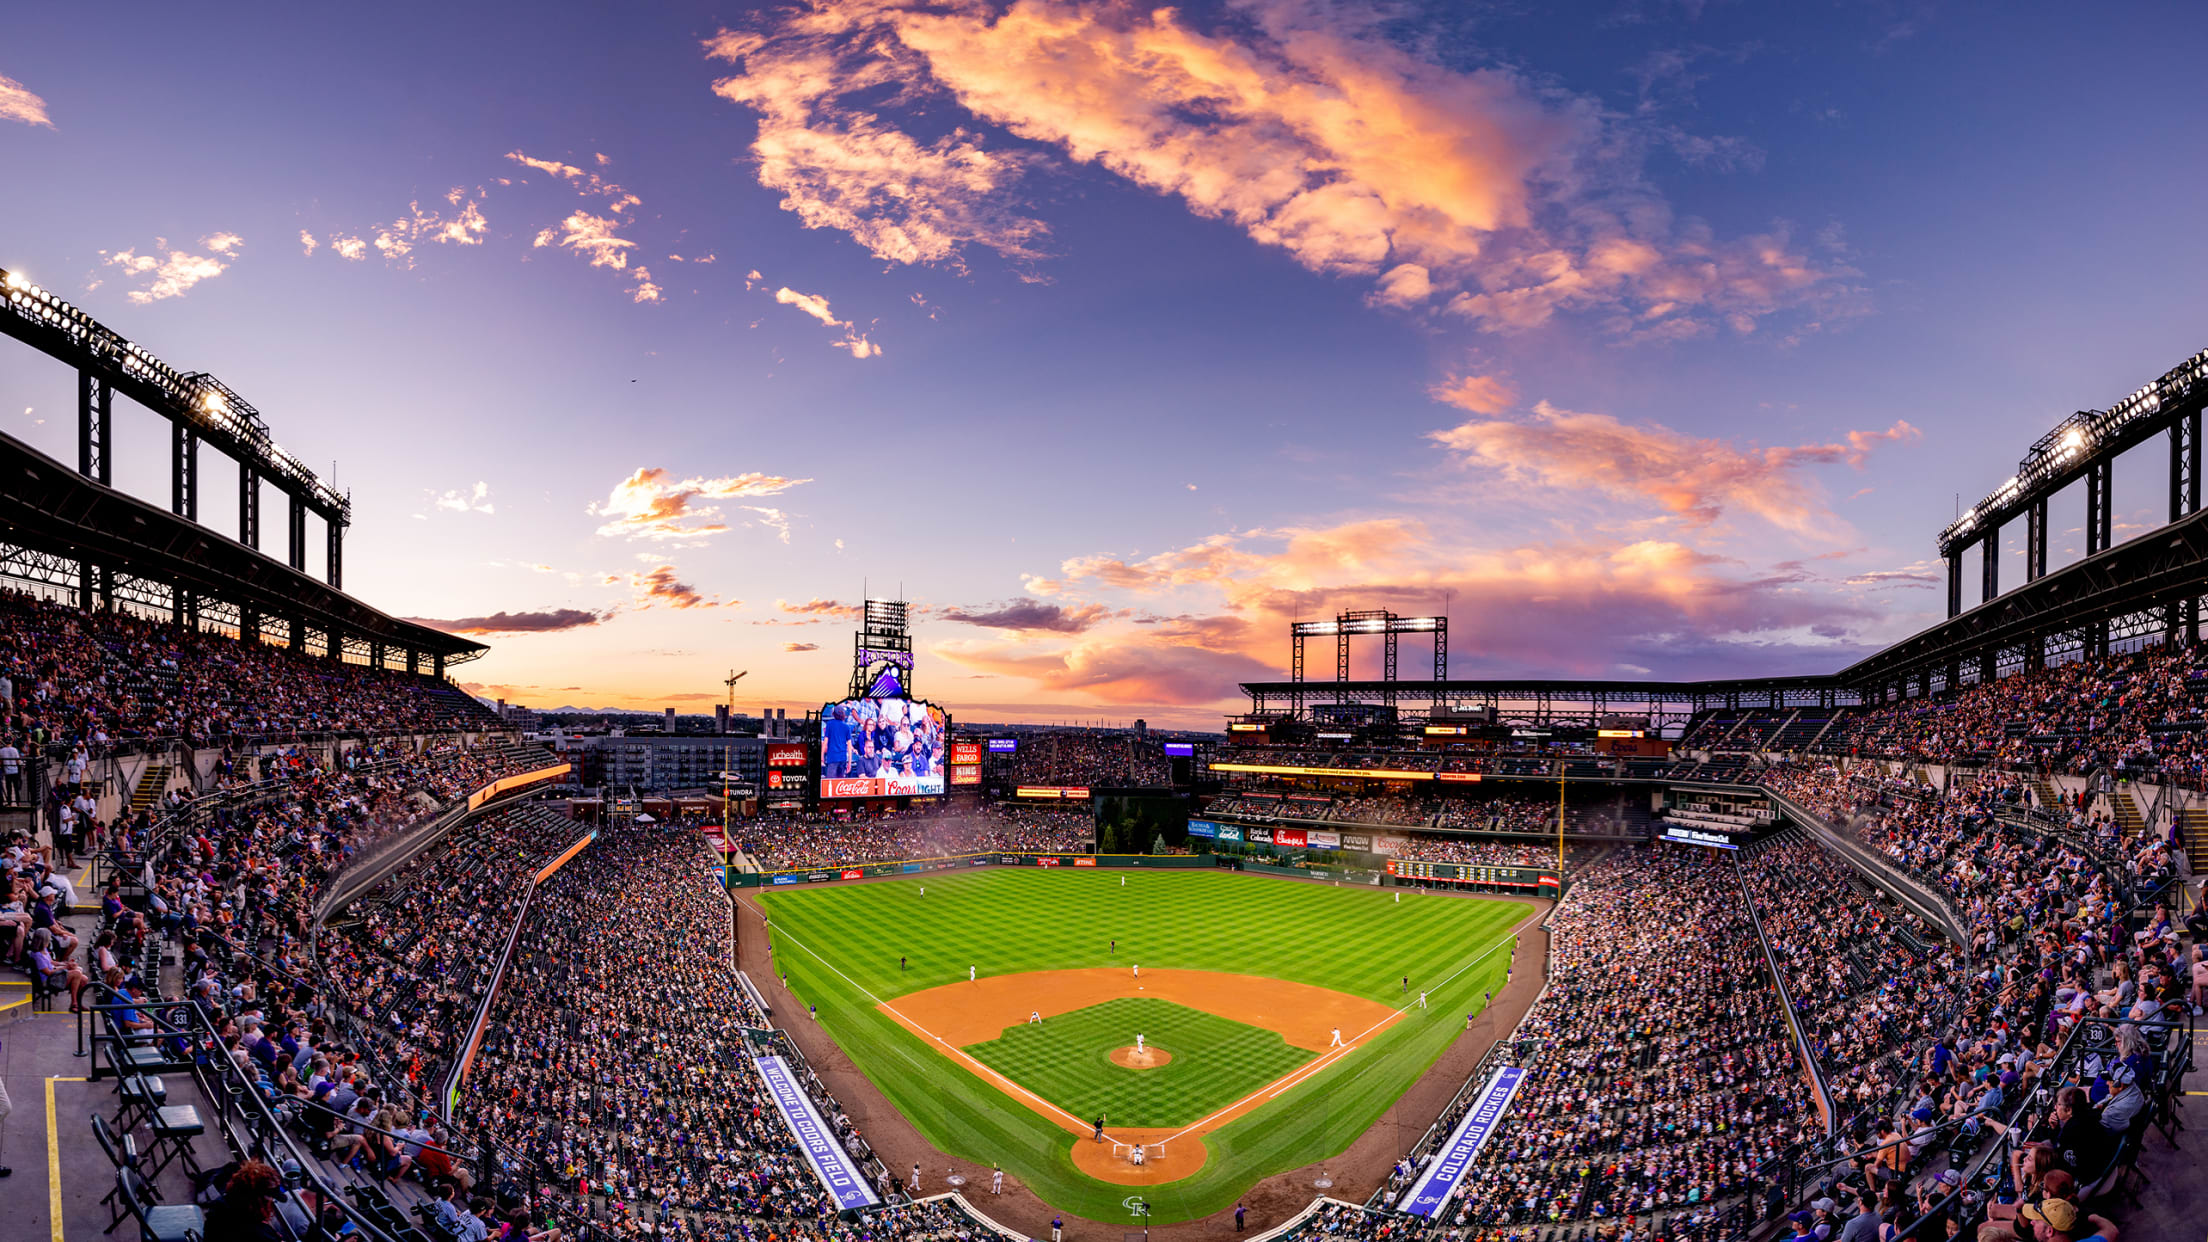 Mizzou Night at Coors Field